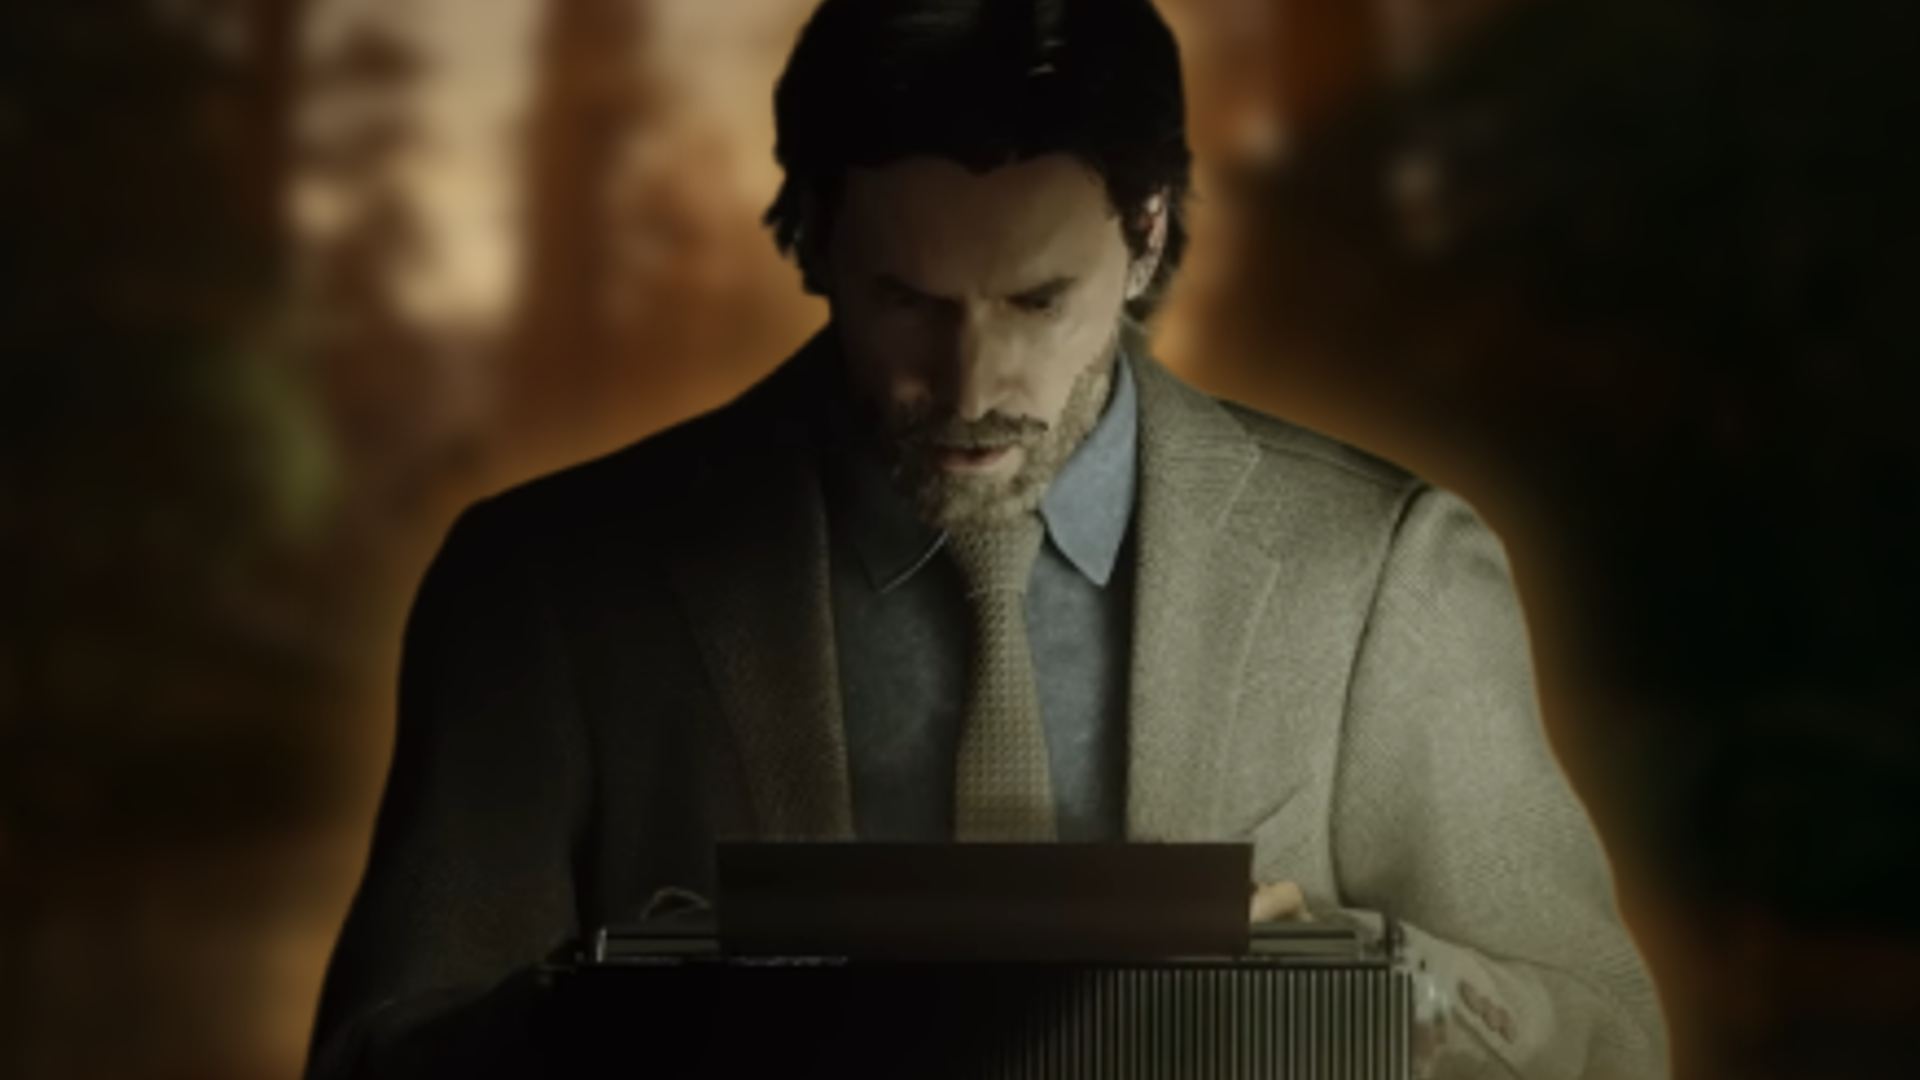 Here's A Huge New Look At Alan Wake 2 Gameplay